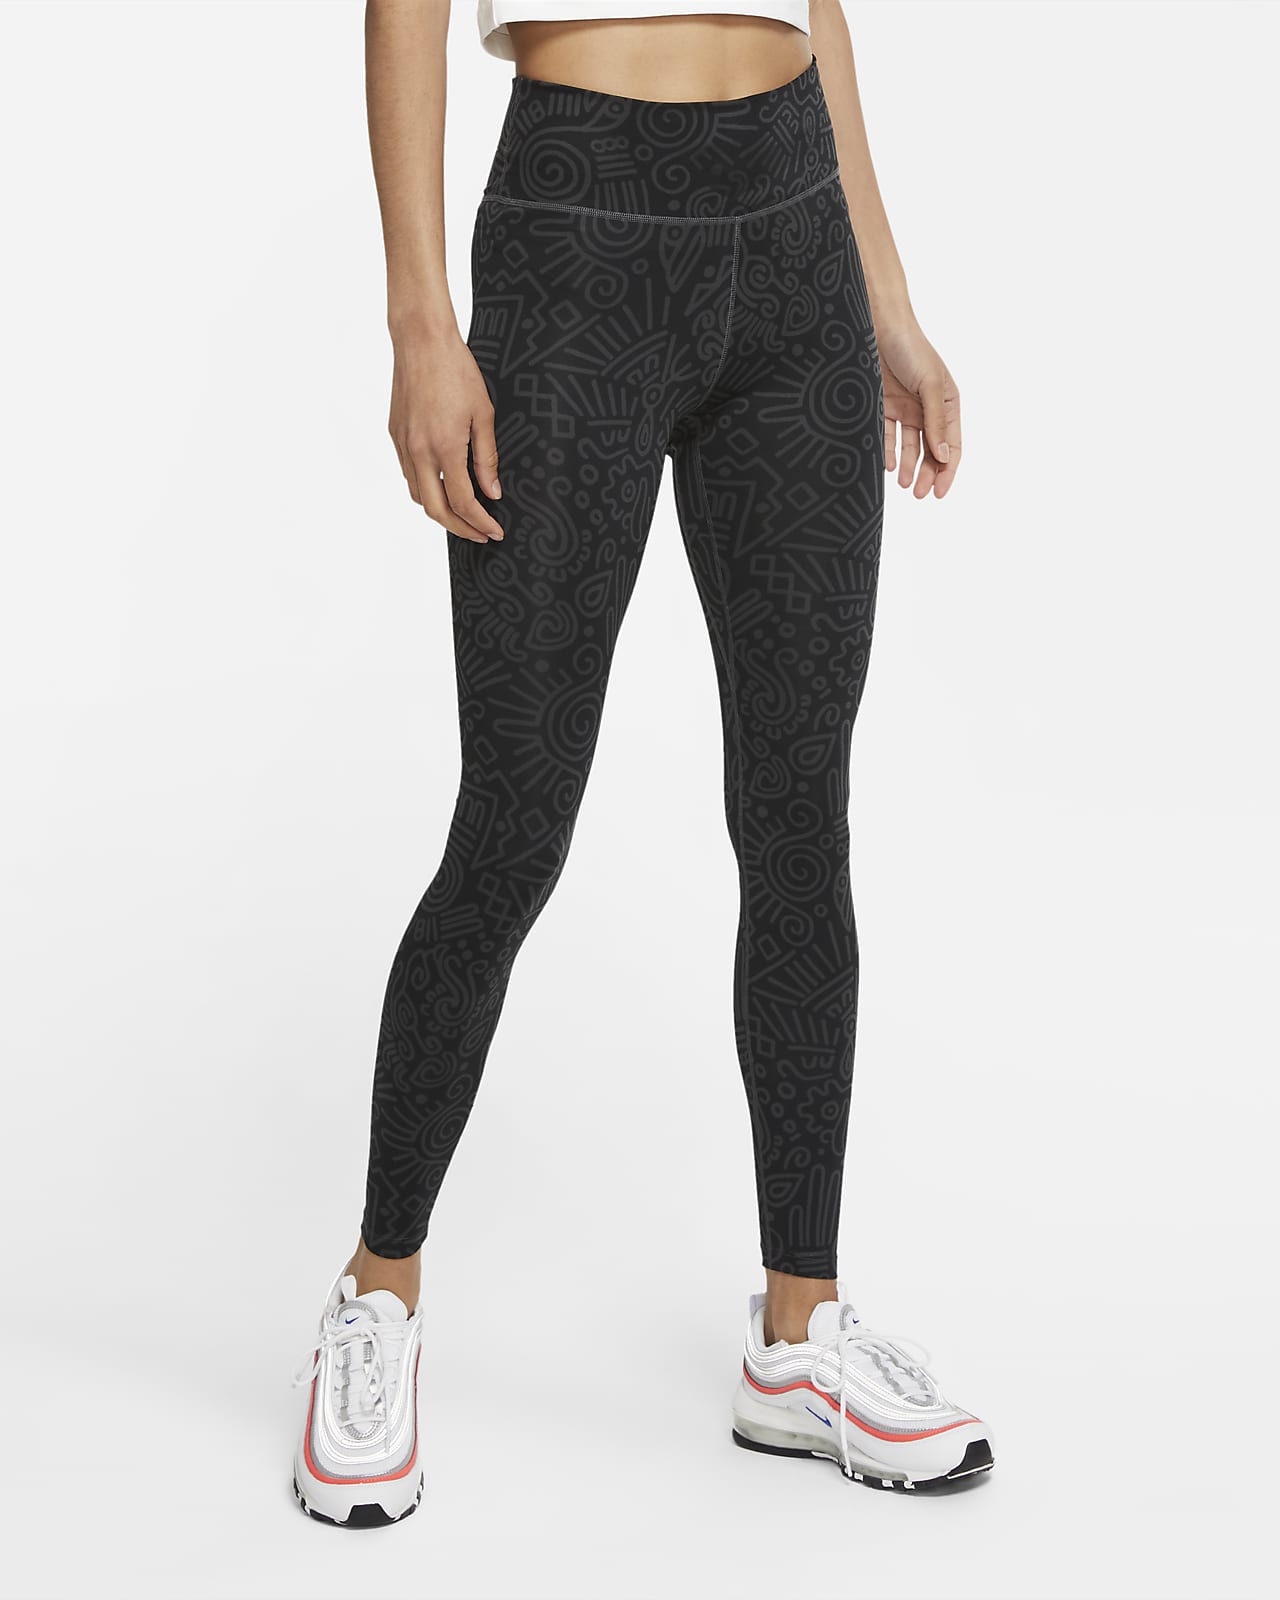 Nike Ladies One Mid-Rise Golf Legging Trousers from american golf